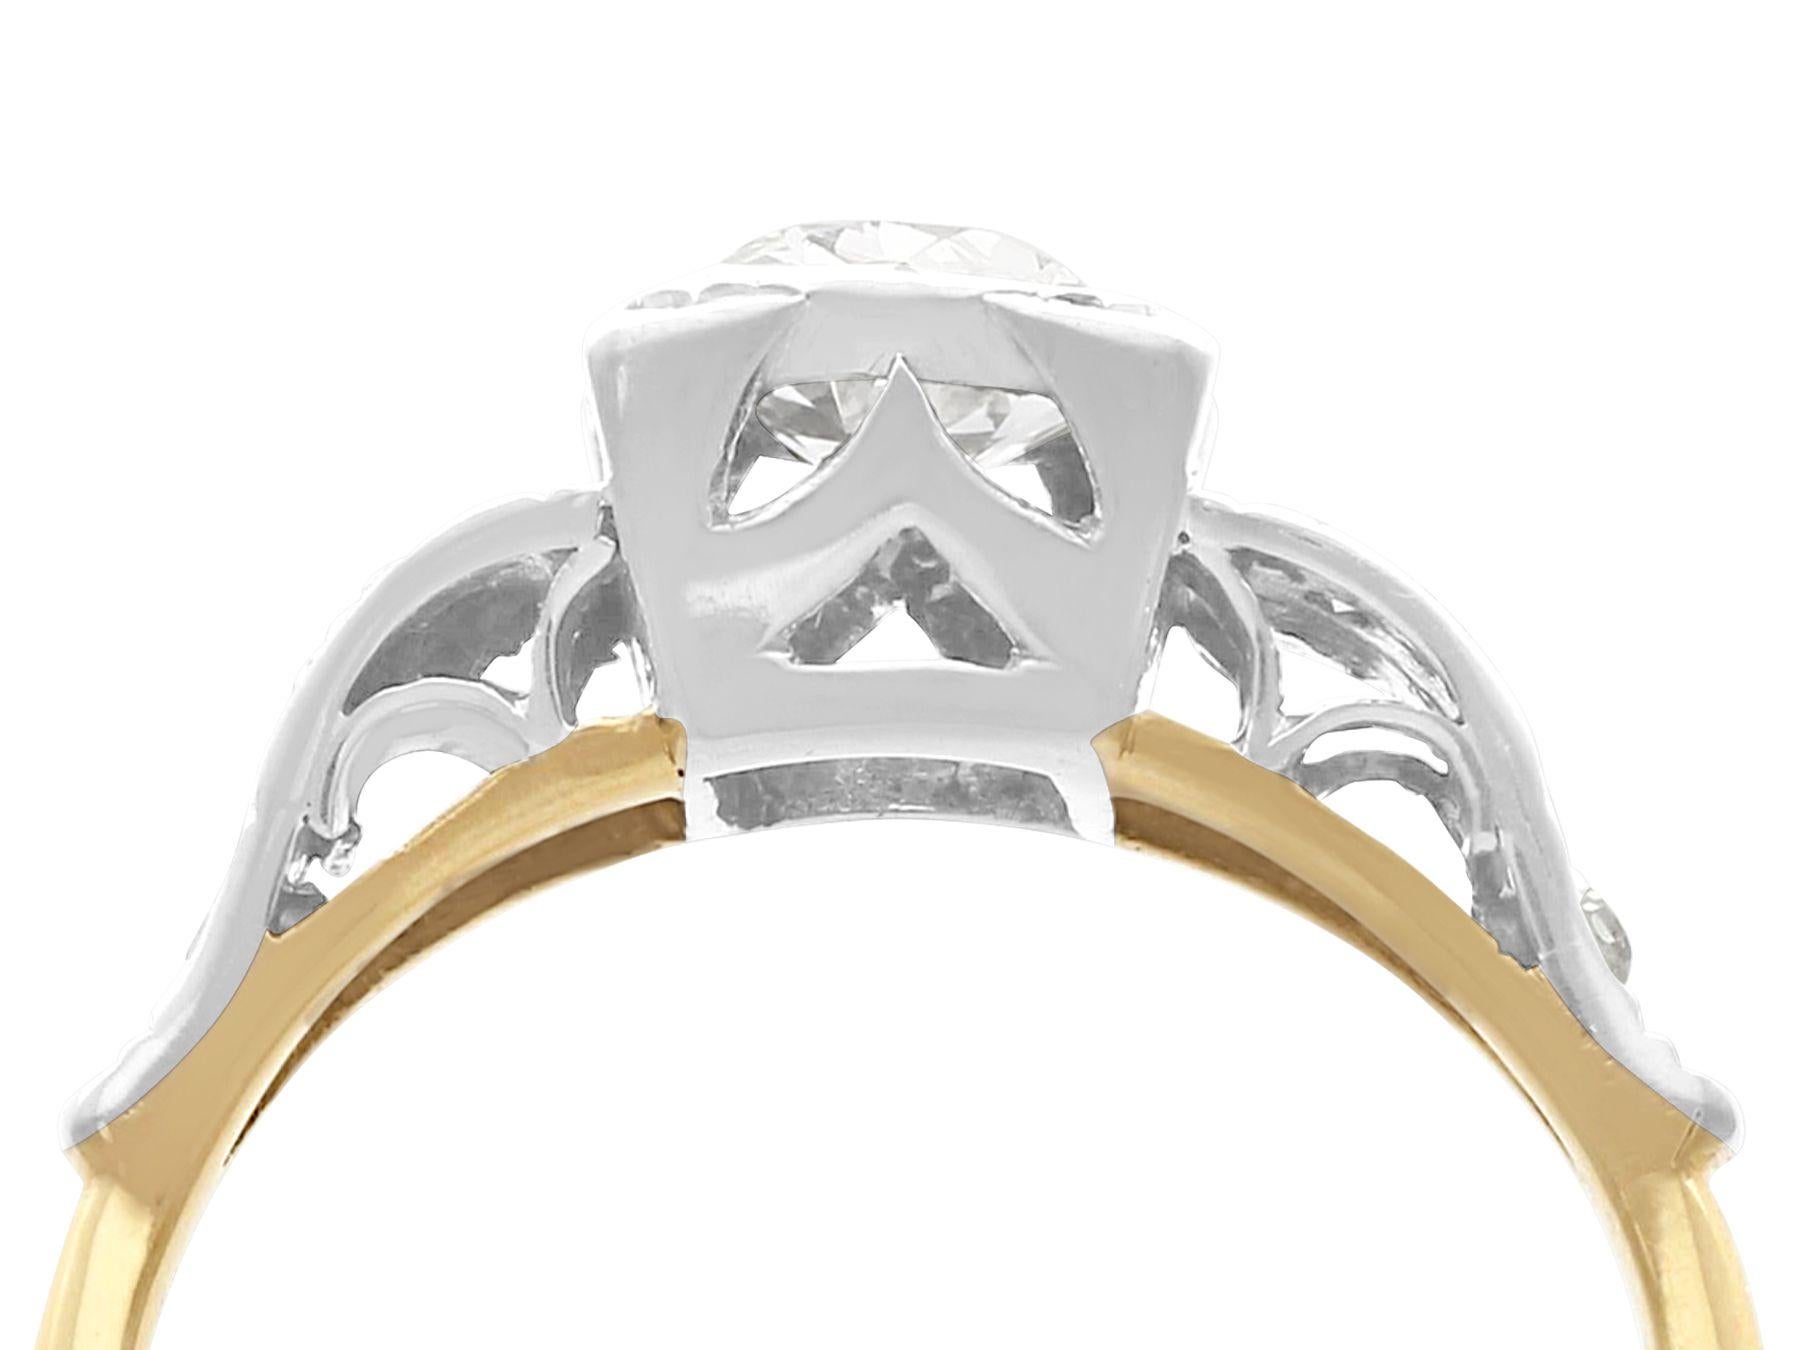 A stunning, fine and impressive vintage 0.87 carat diamond and 18 karat yellow gold, platinum set solitaire ring; part of our diverse diamond jewelry and estate jewelry collections

This stunning 1940s vintage solitaire diamond ring has been crafted